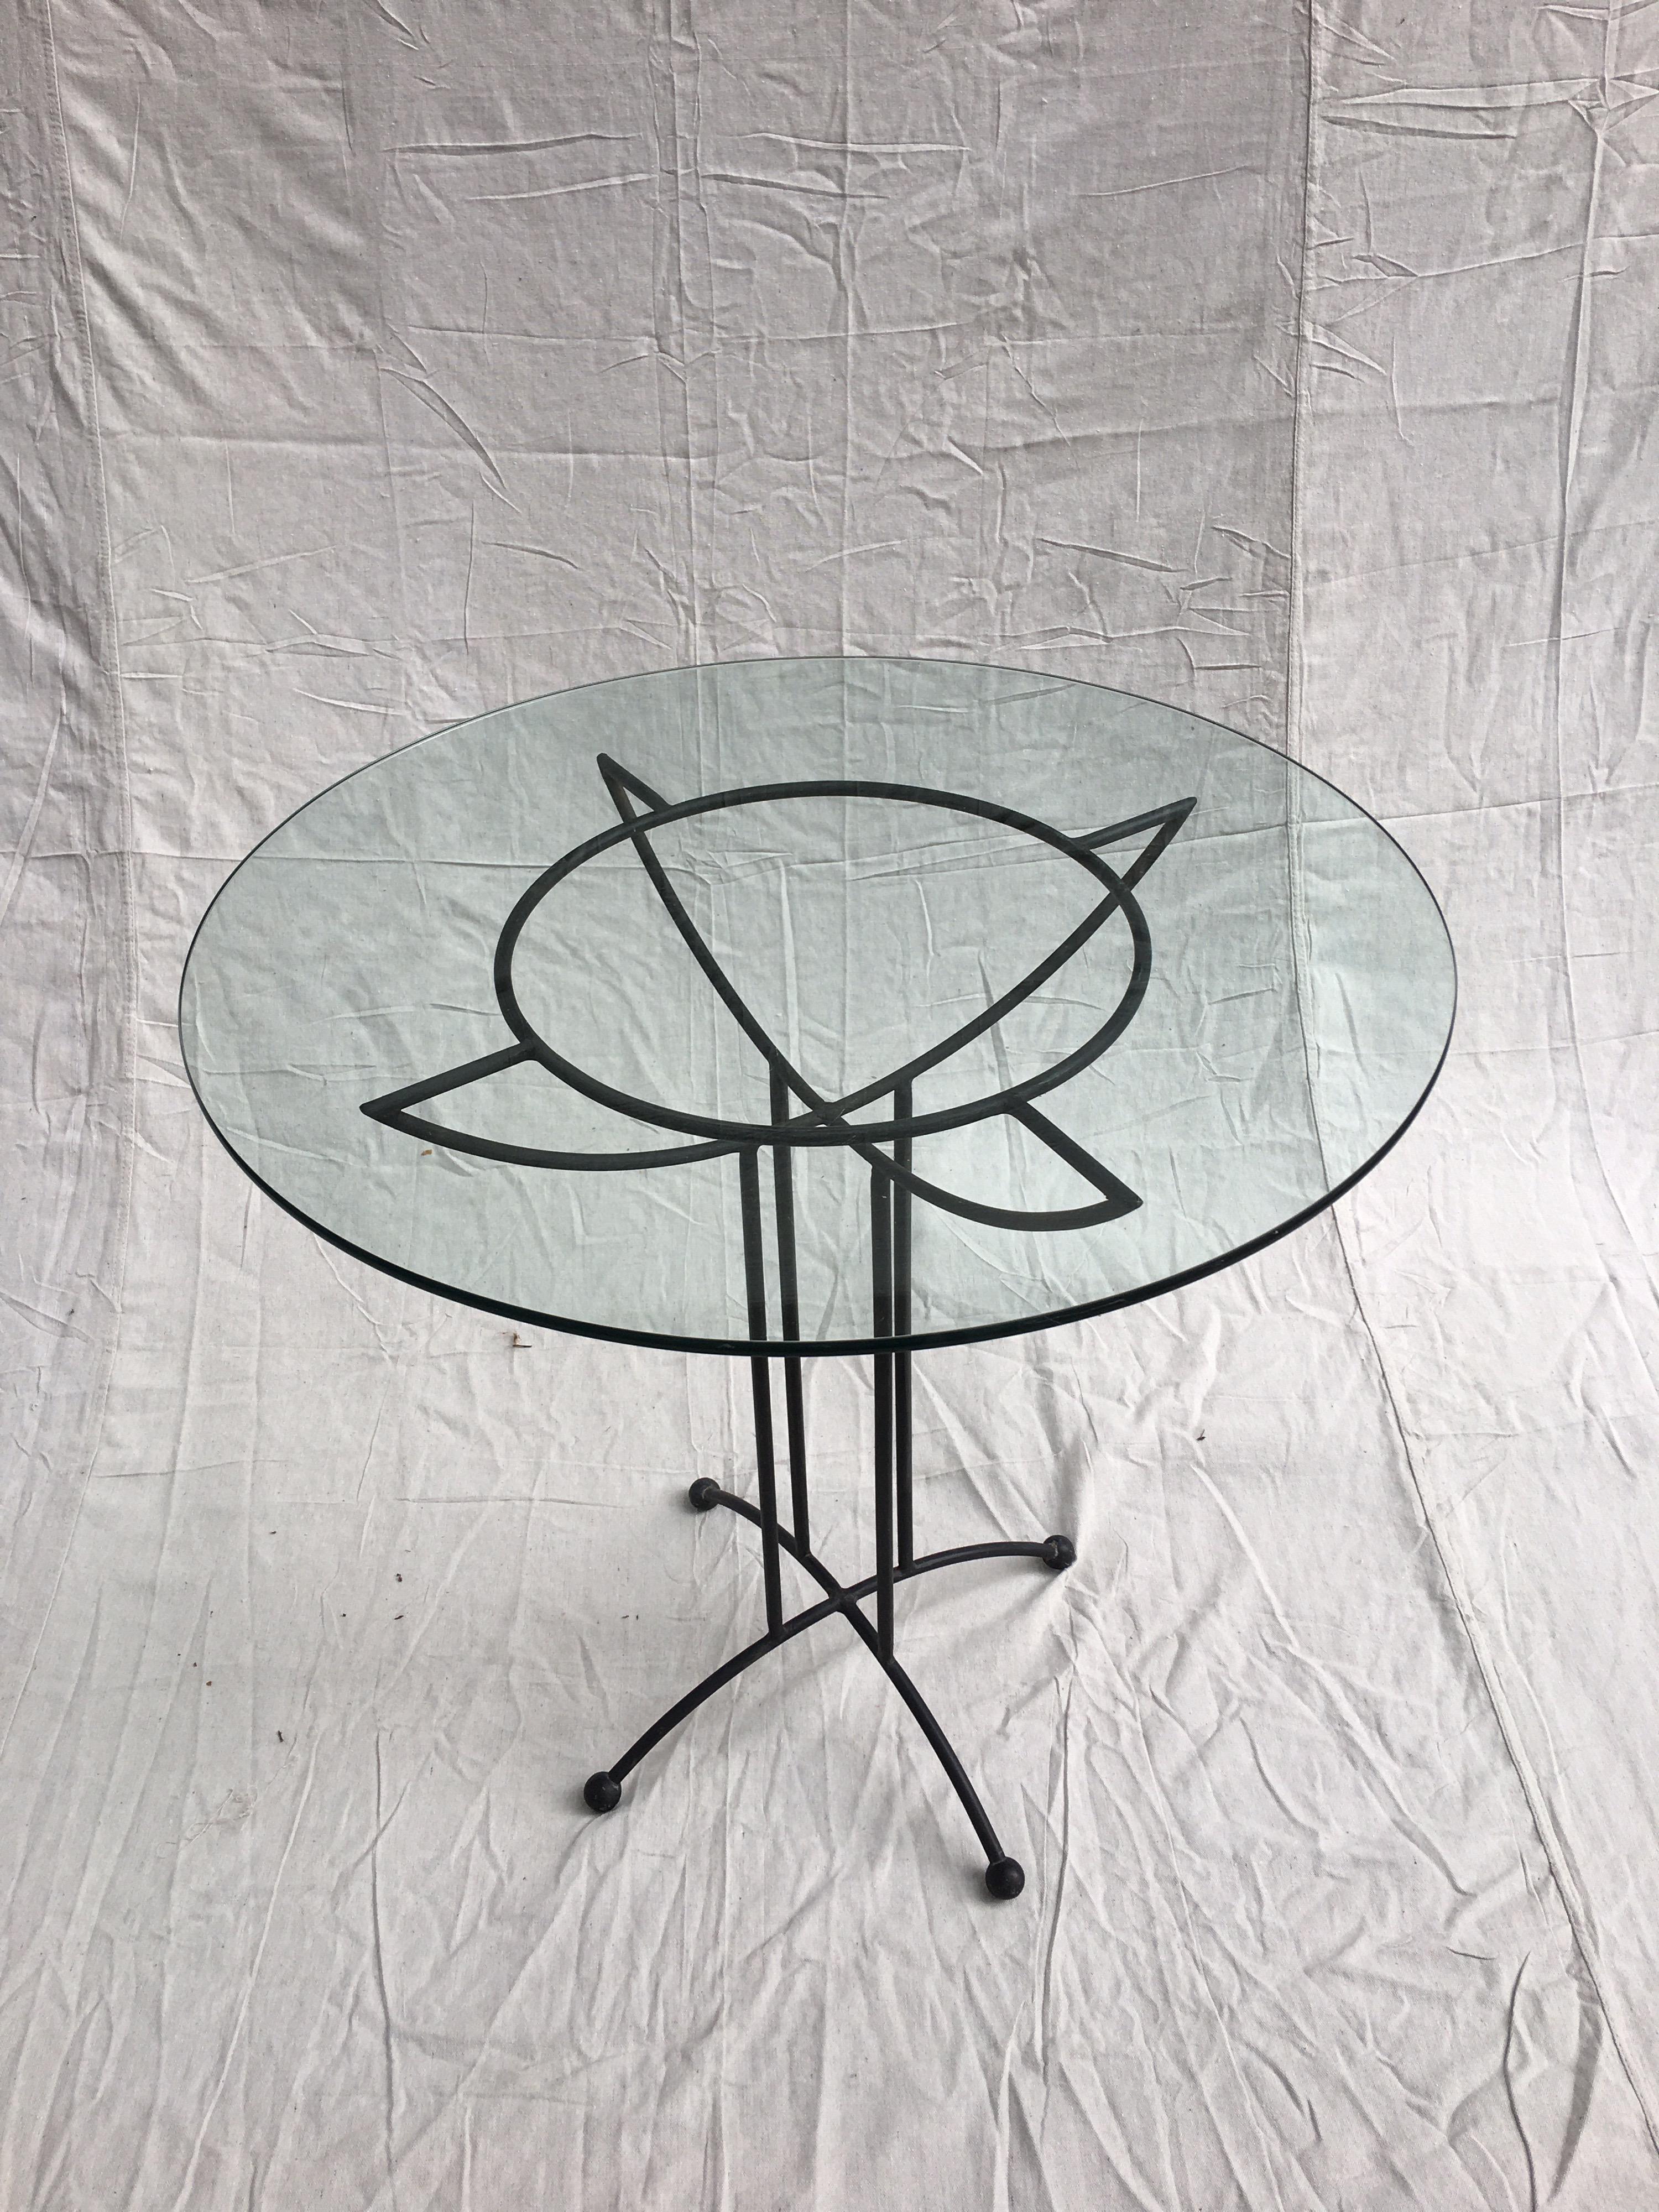 Tony Paul style glass and iron table. Great size for small spaces, use inside or out! Rubber ball feet and Geometric Design gives this table an extra kick!